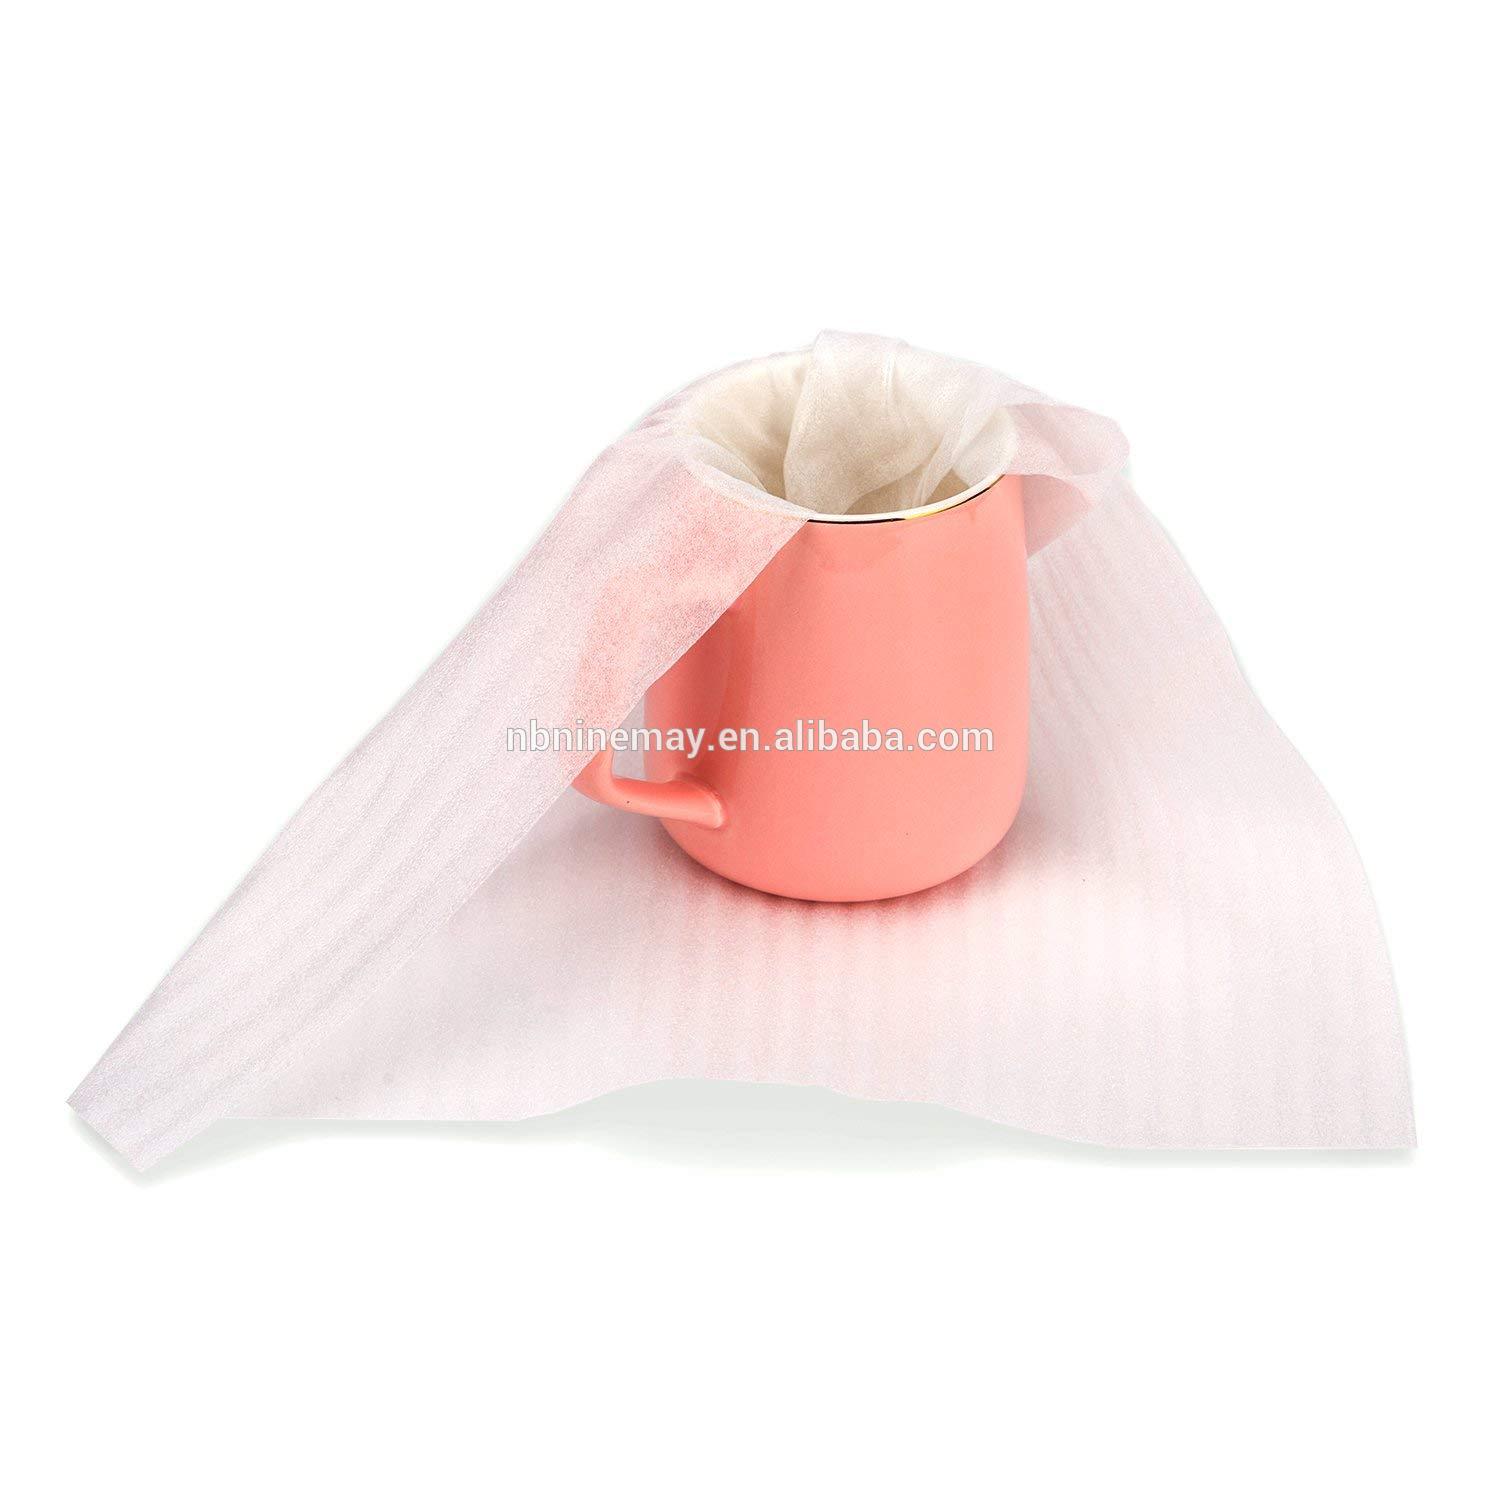 EPE Cushion foam wrap sheets moving supplies packing material all purpose protection storage